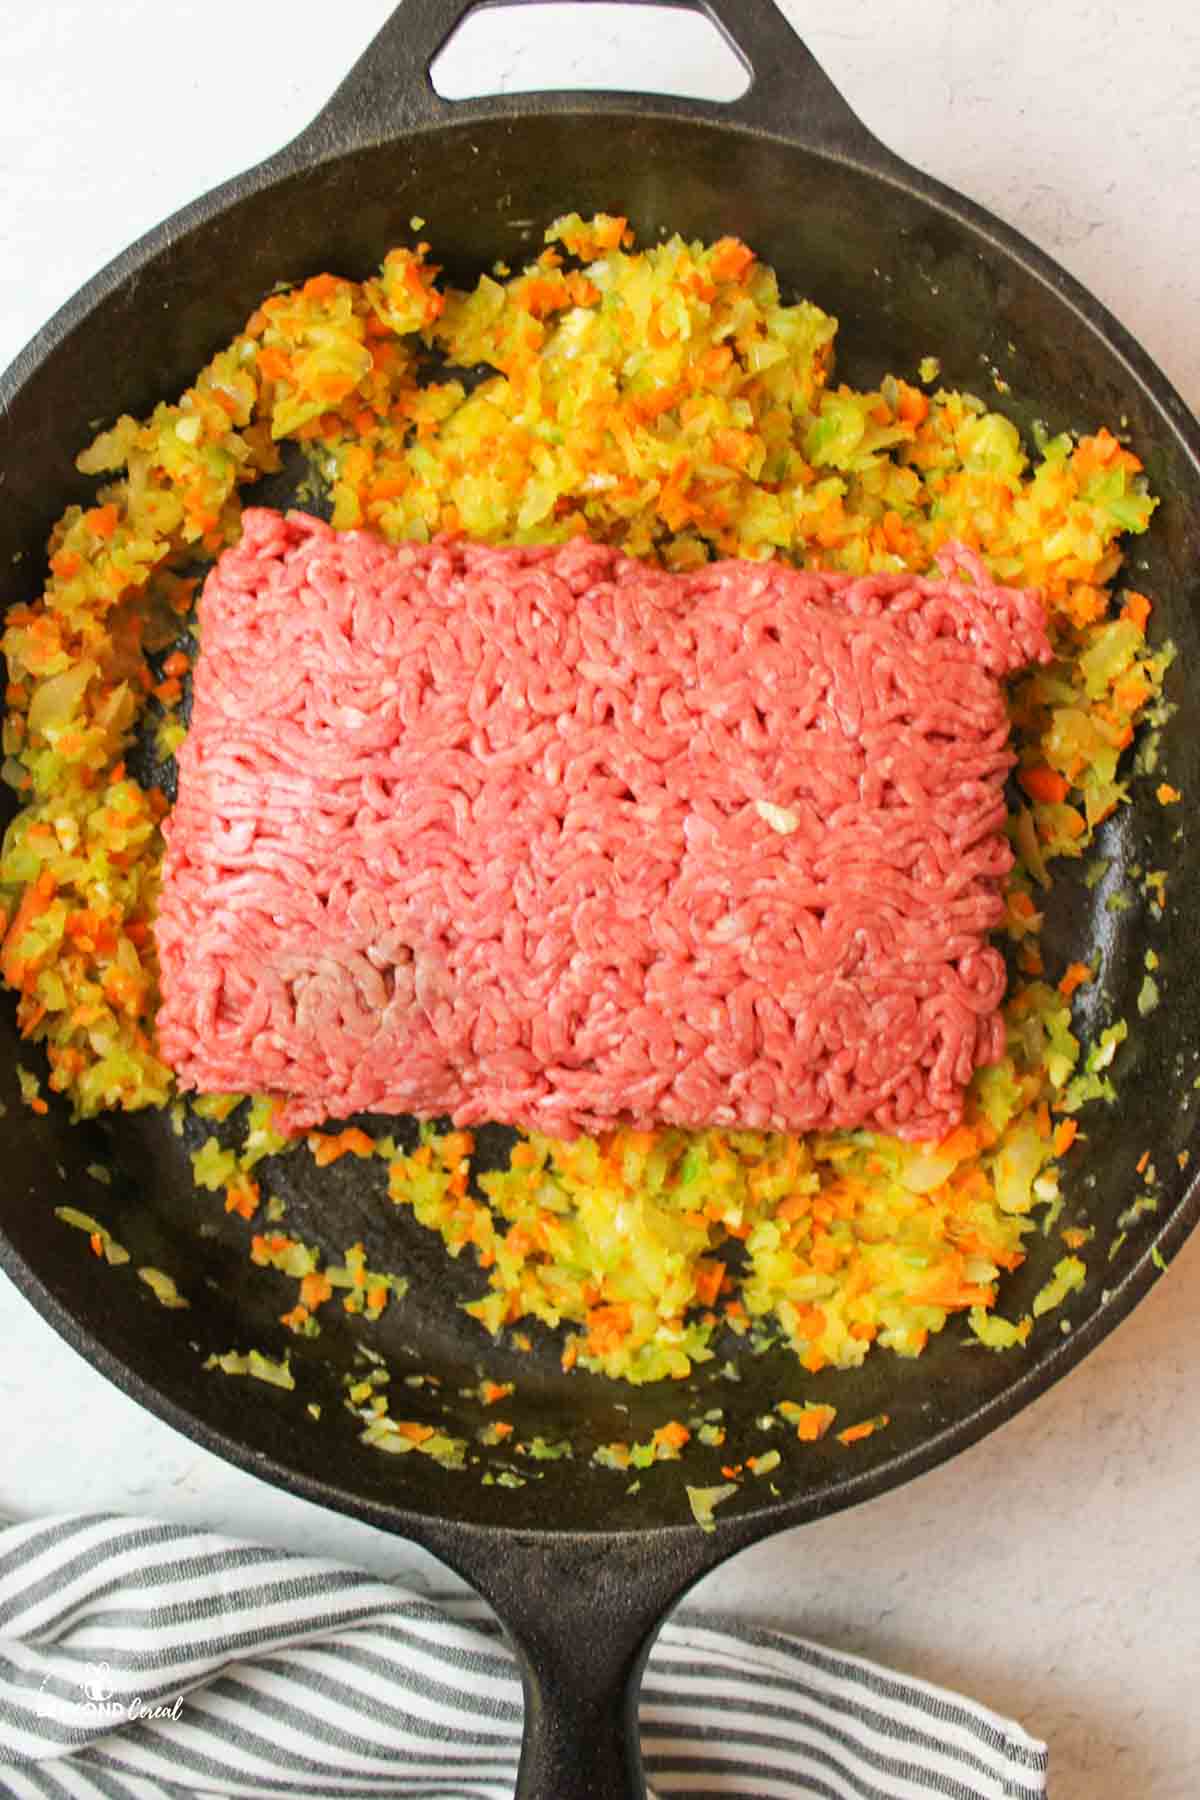 raw ground beef added to a skillet of cooked carrots, onion, garlic, and celery